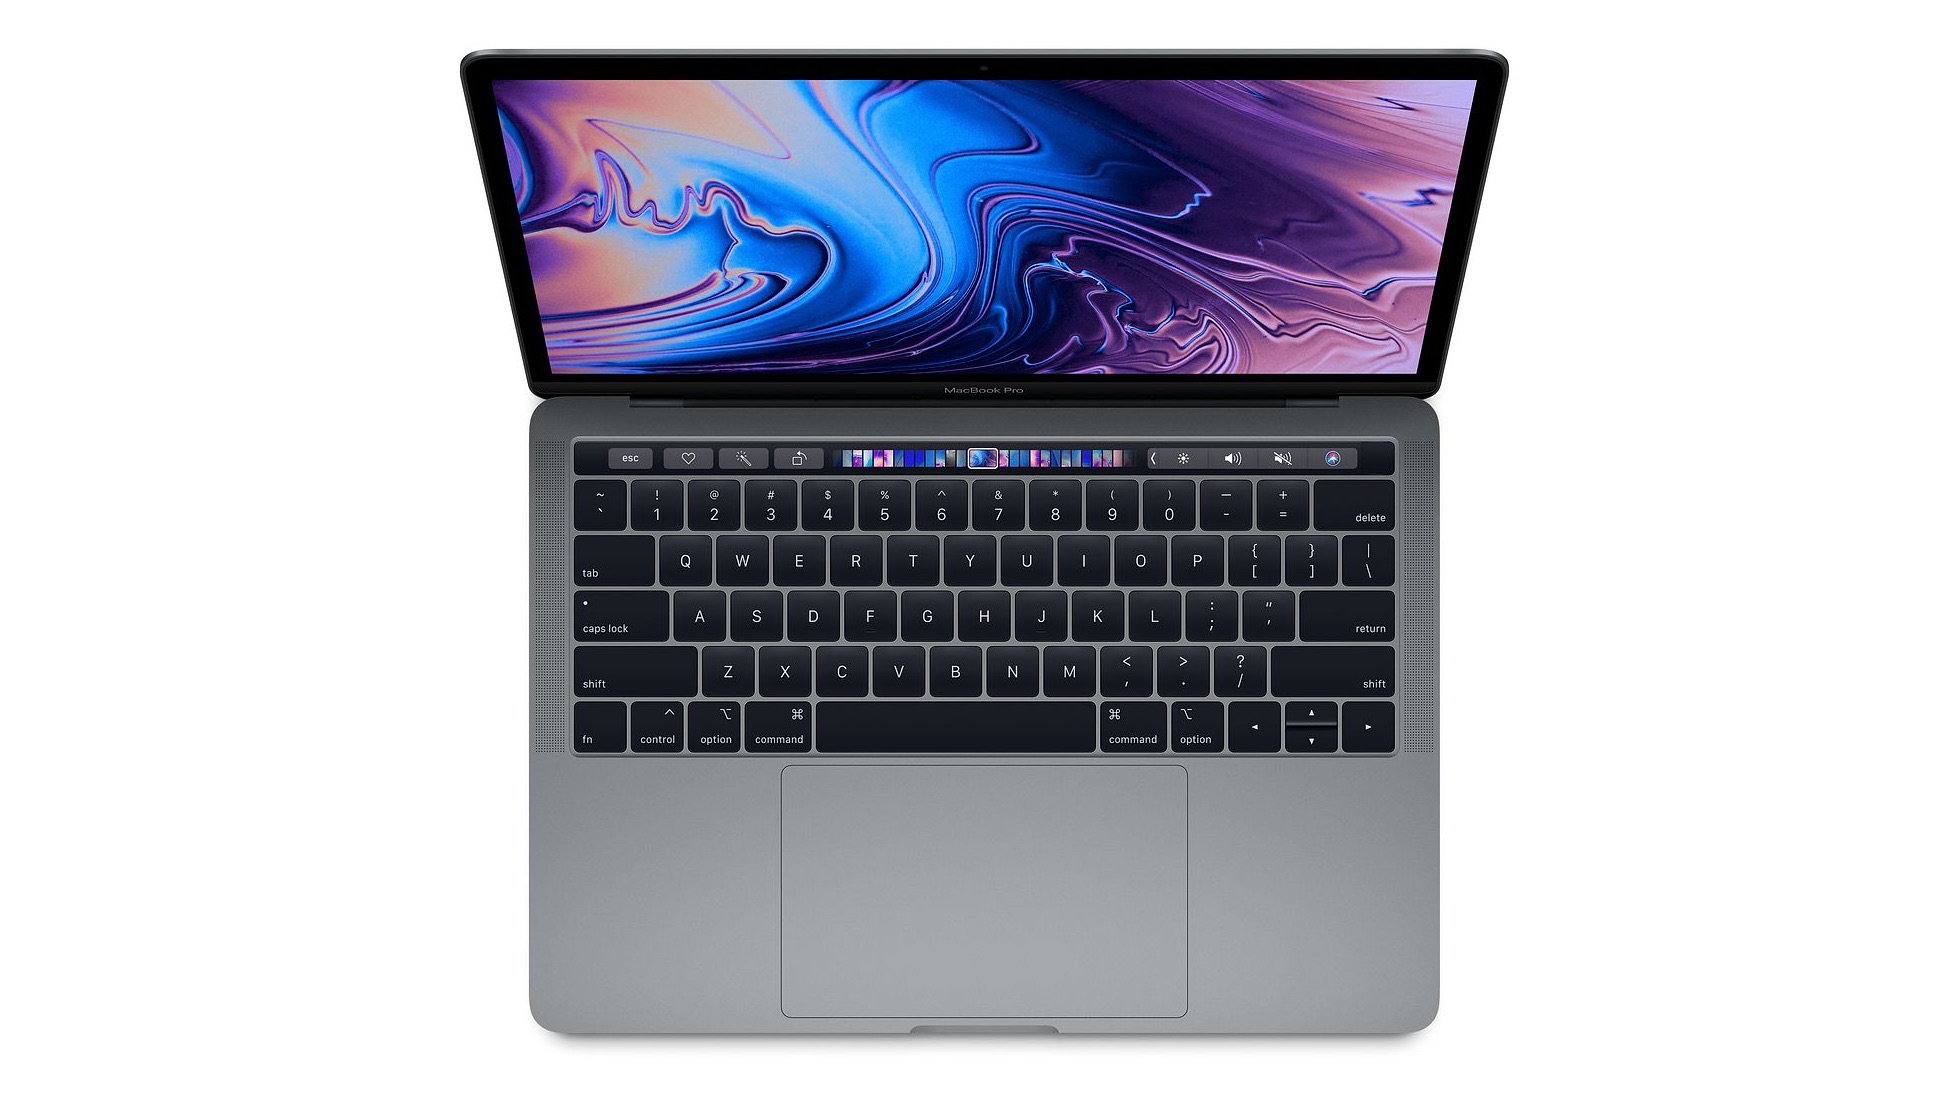 MacBook Pro Owners With Faulty Butterfly Keyboards Now Receiving Emails About $50 Million Lawsuit Settlement